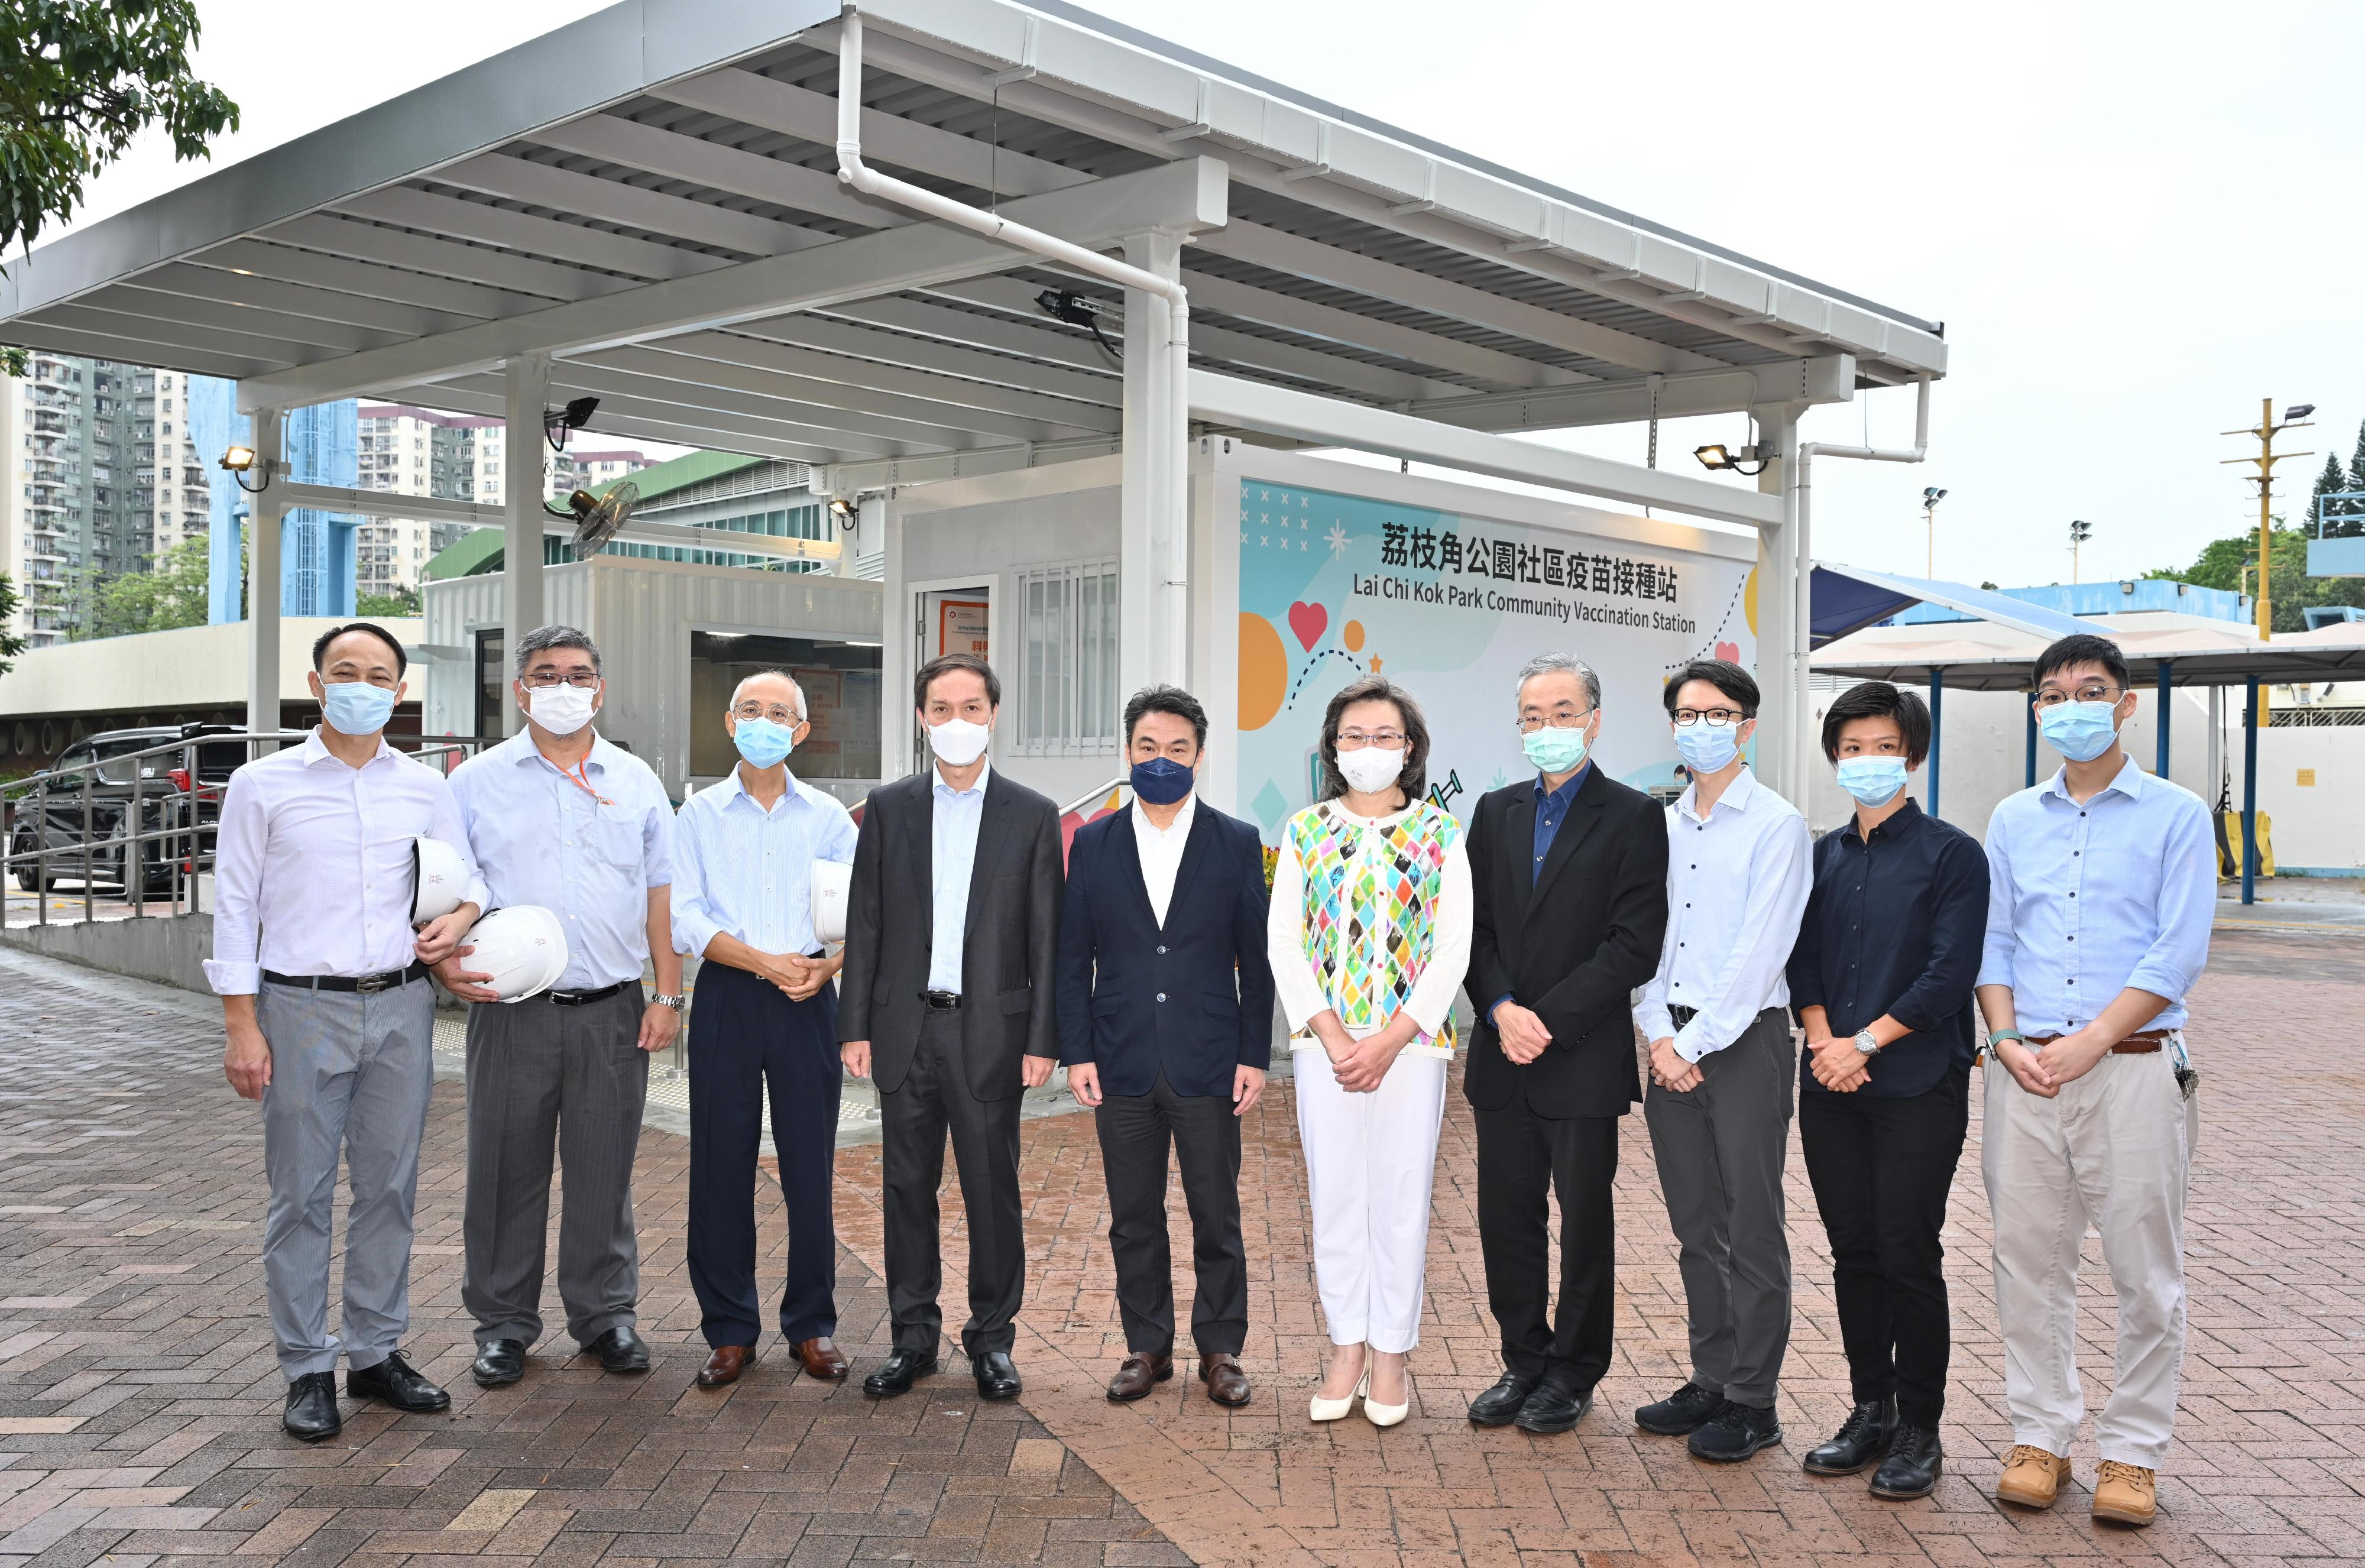 The Secretary for the Civil Service, Mrs Ingrid Yeung, visited the Lai Chi Kok Park Community Vaccination Station (CVS) today (September 29) to see its readiness for coming into operation tomorrow (September 30). Photo shows Mrs Yeung (fifth right) with representatives from the Architectural Services Department and the building contractor of the CVS; the person-in-charge of the medical partner of the CVS, Dr Samuel Kwok (fifth left); and the Director of General Grades of the Civil Service Bureau, Mr Hermes Chan (fourth left).